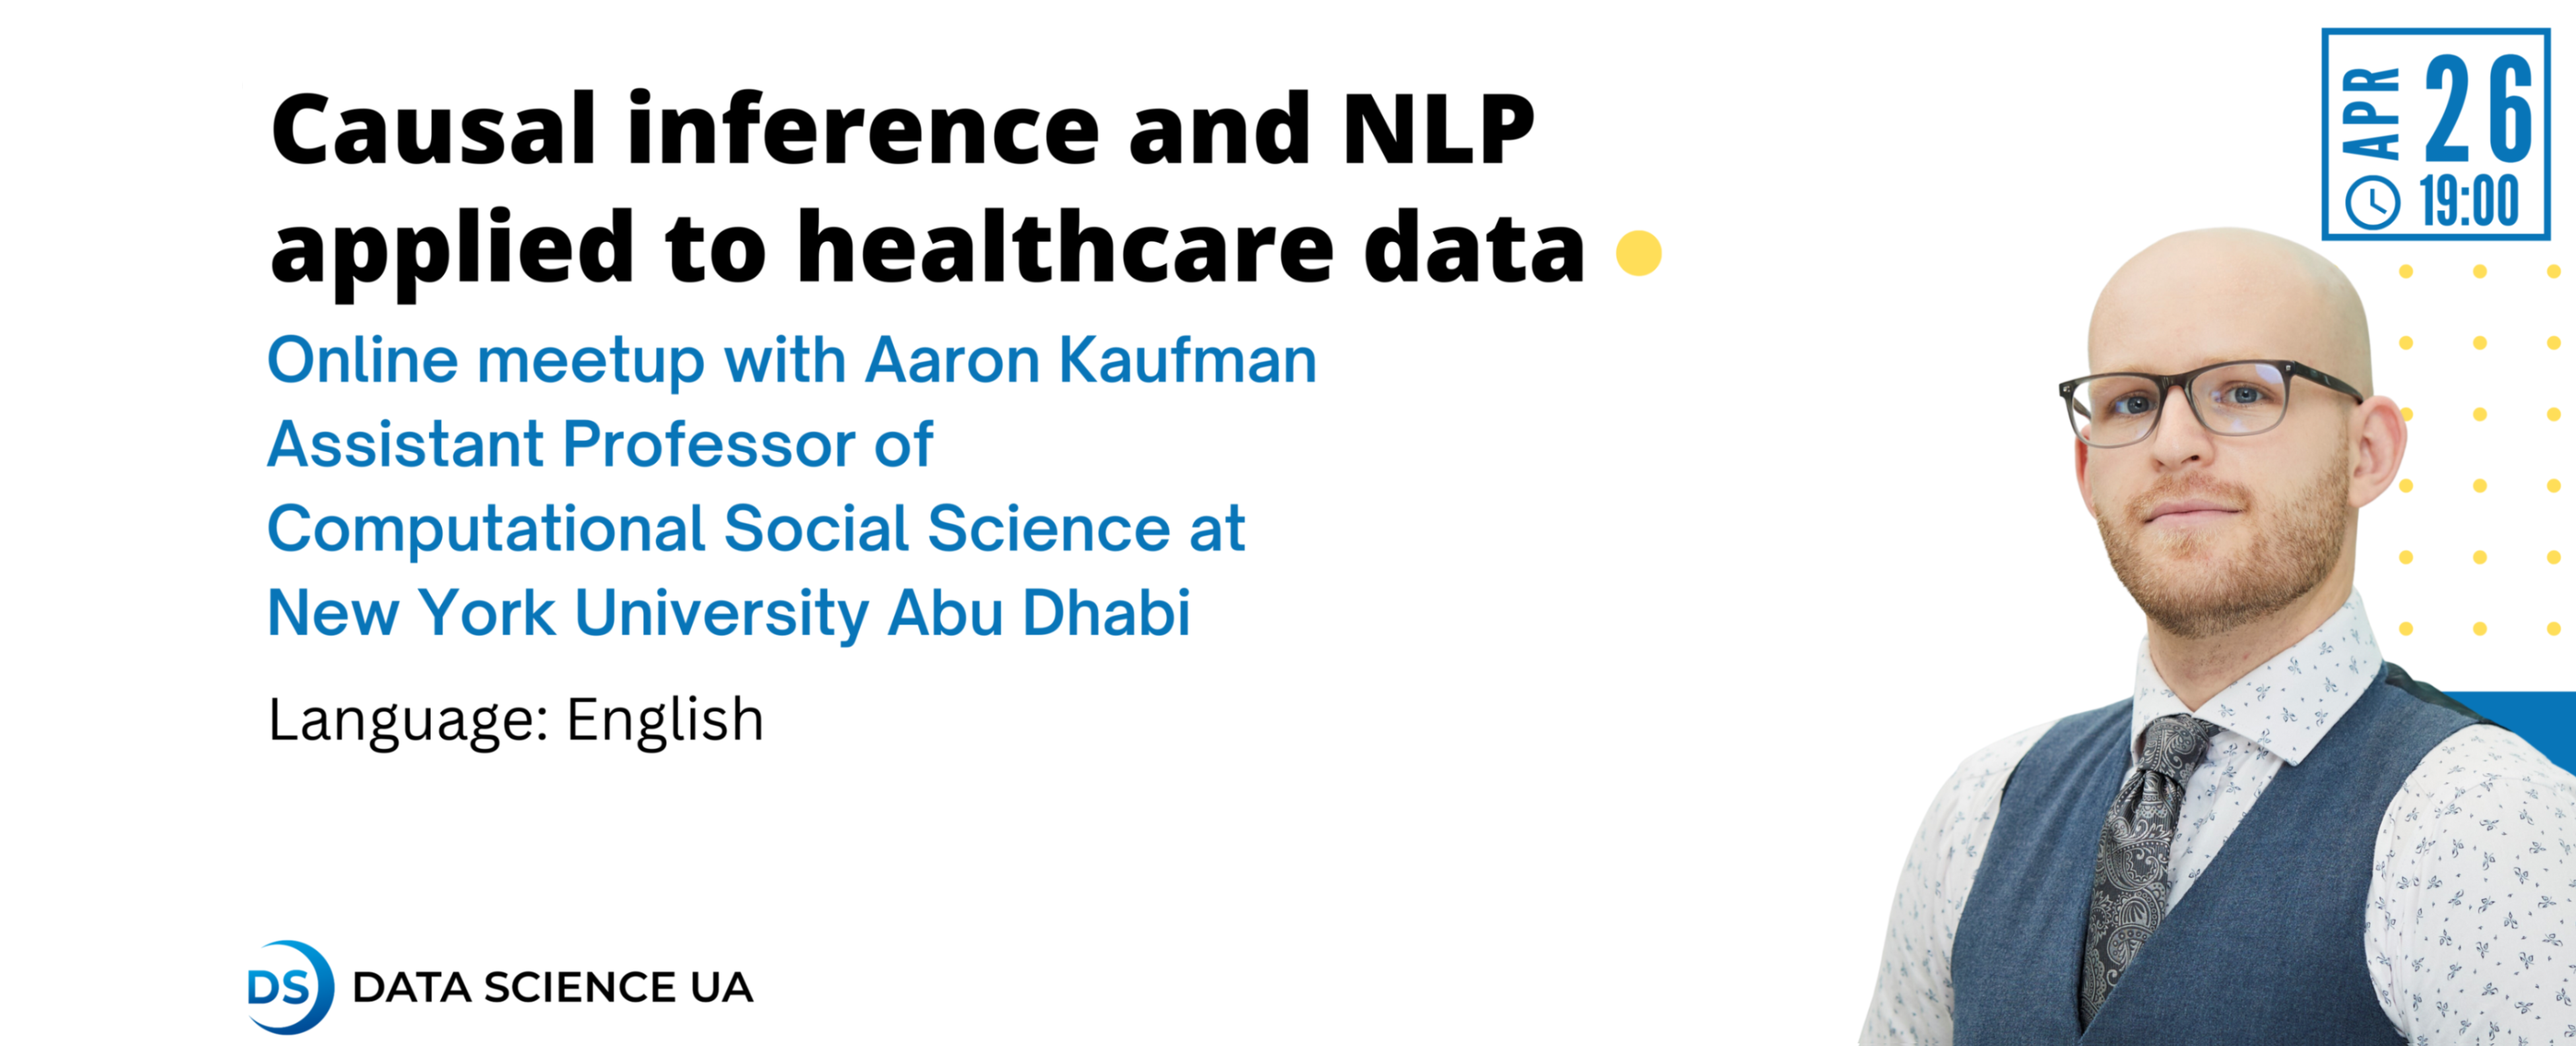 Causal inference and NLP applied to healthcare data